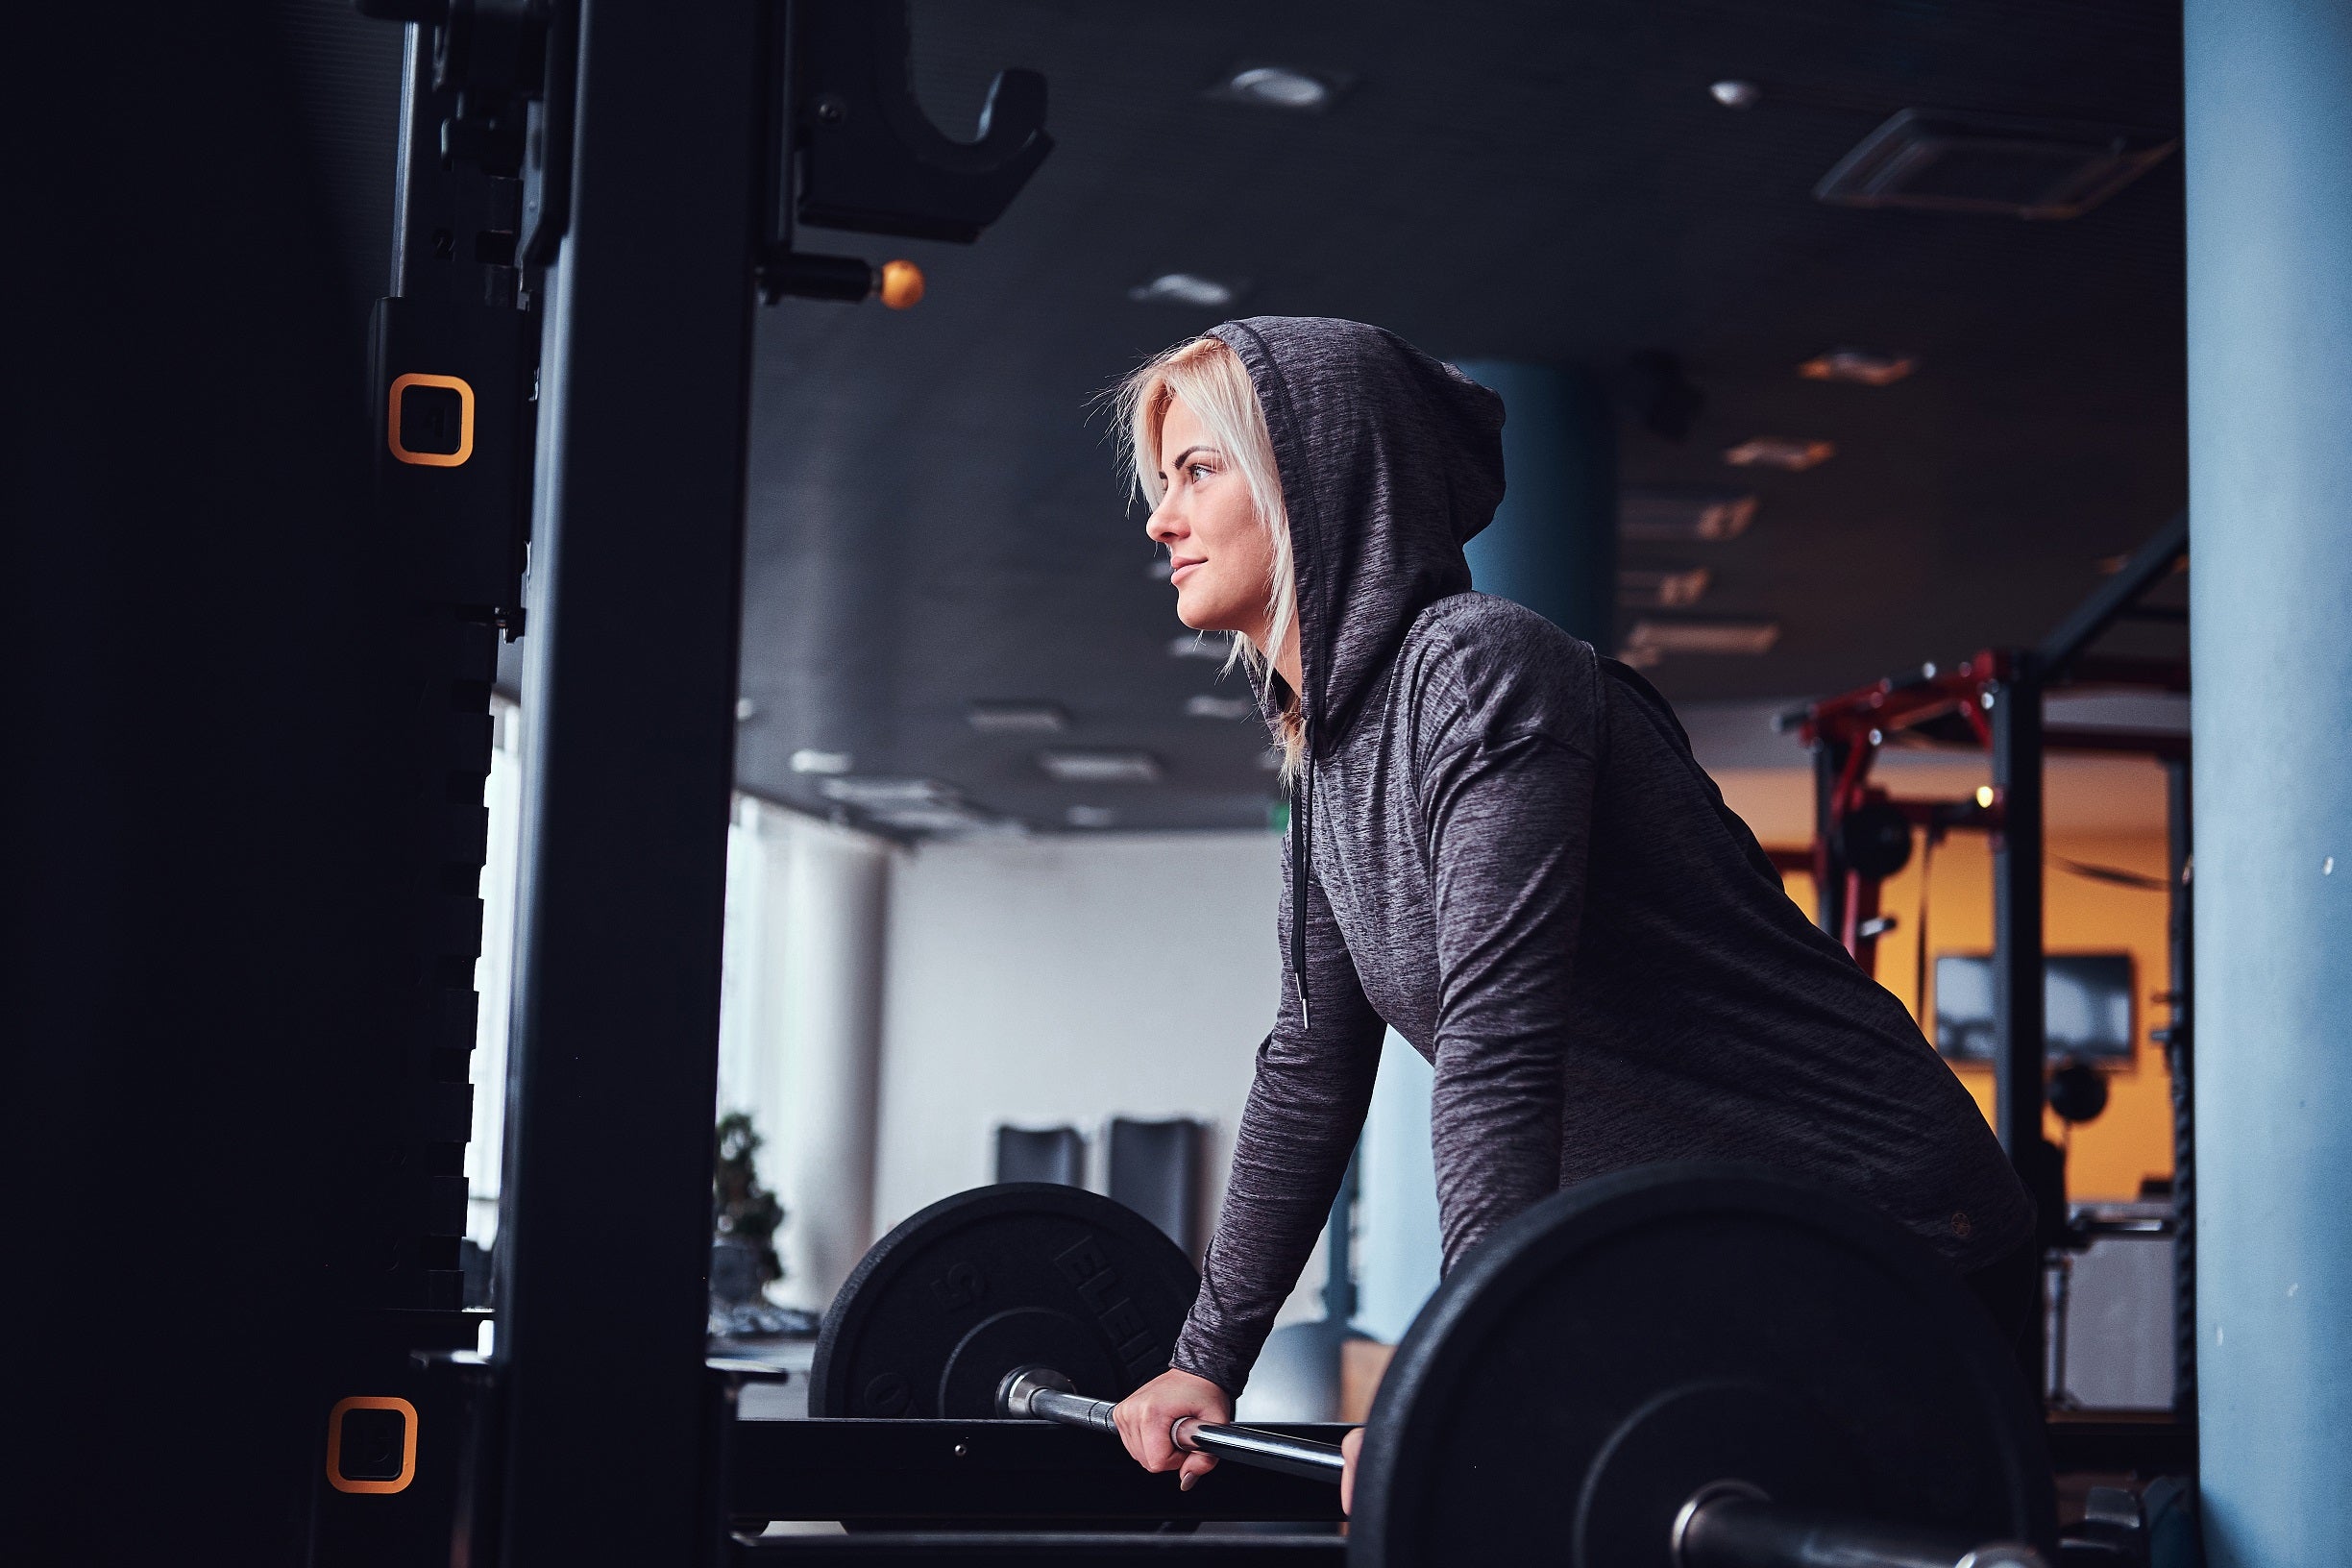 Does Working Out in a Hoodie Increase Weight Loss? You Might Be Surprised